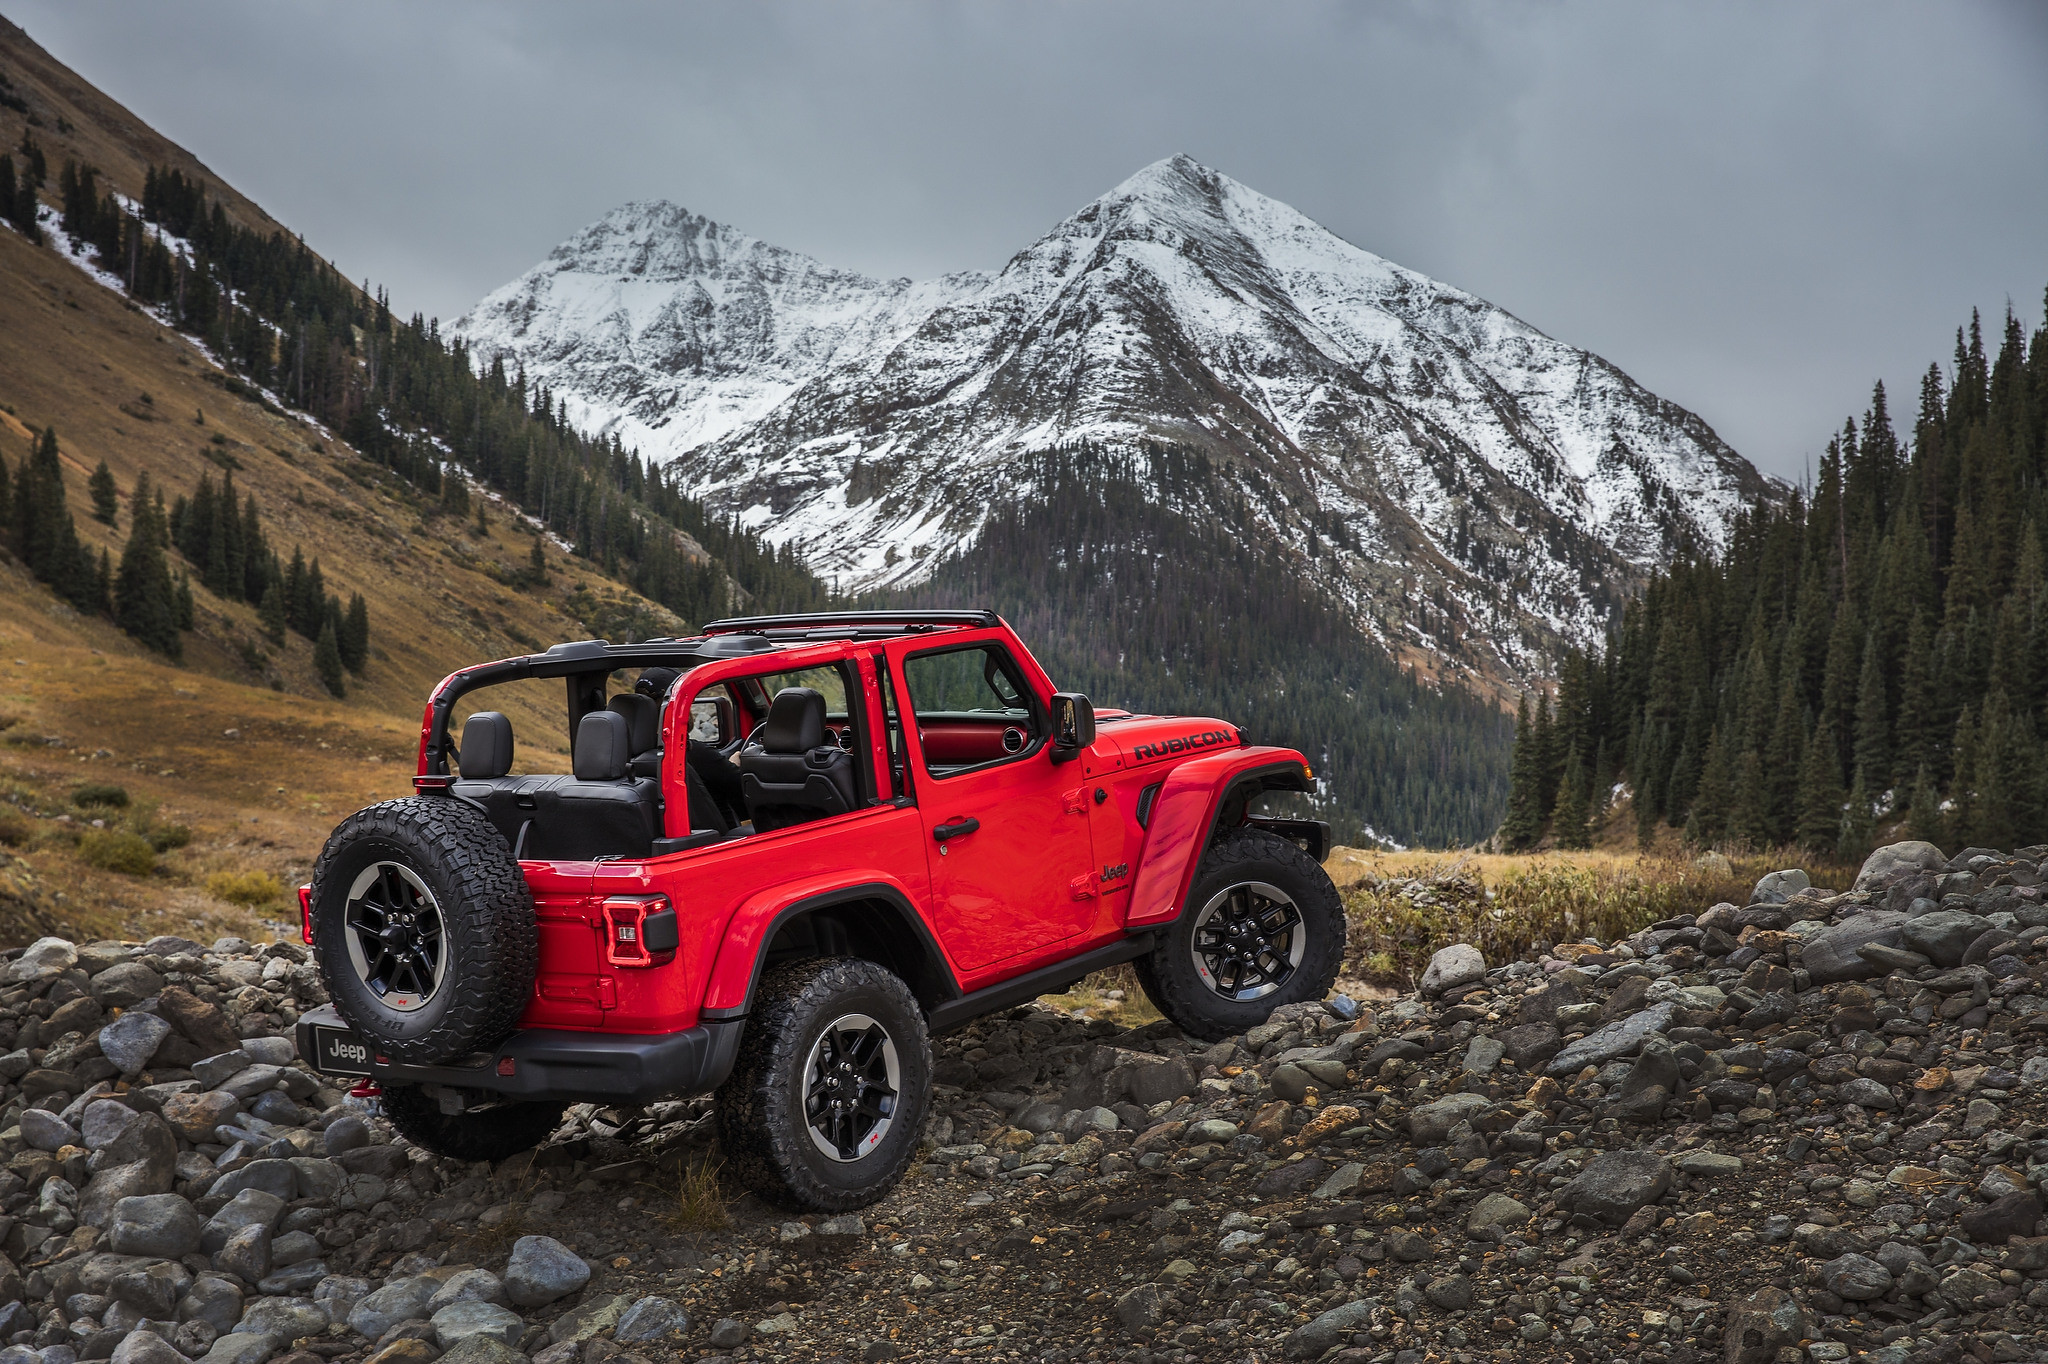 Jeep's Rock-Trac 4x4 System: Off-road King